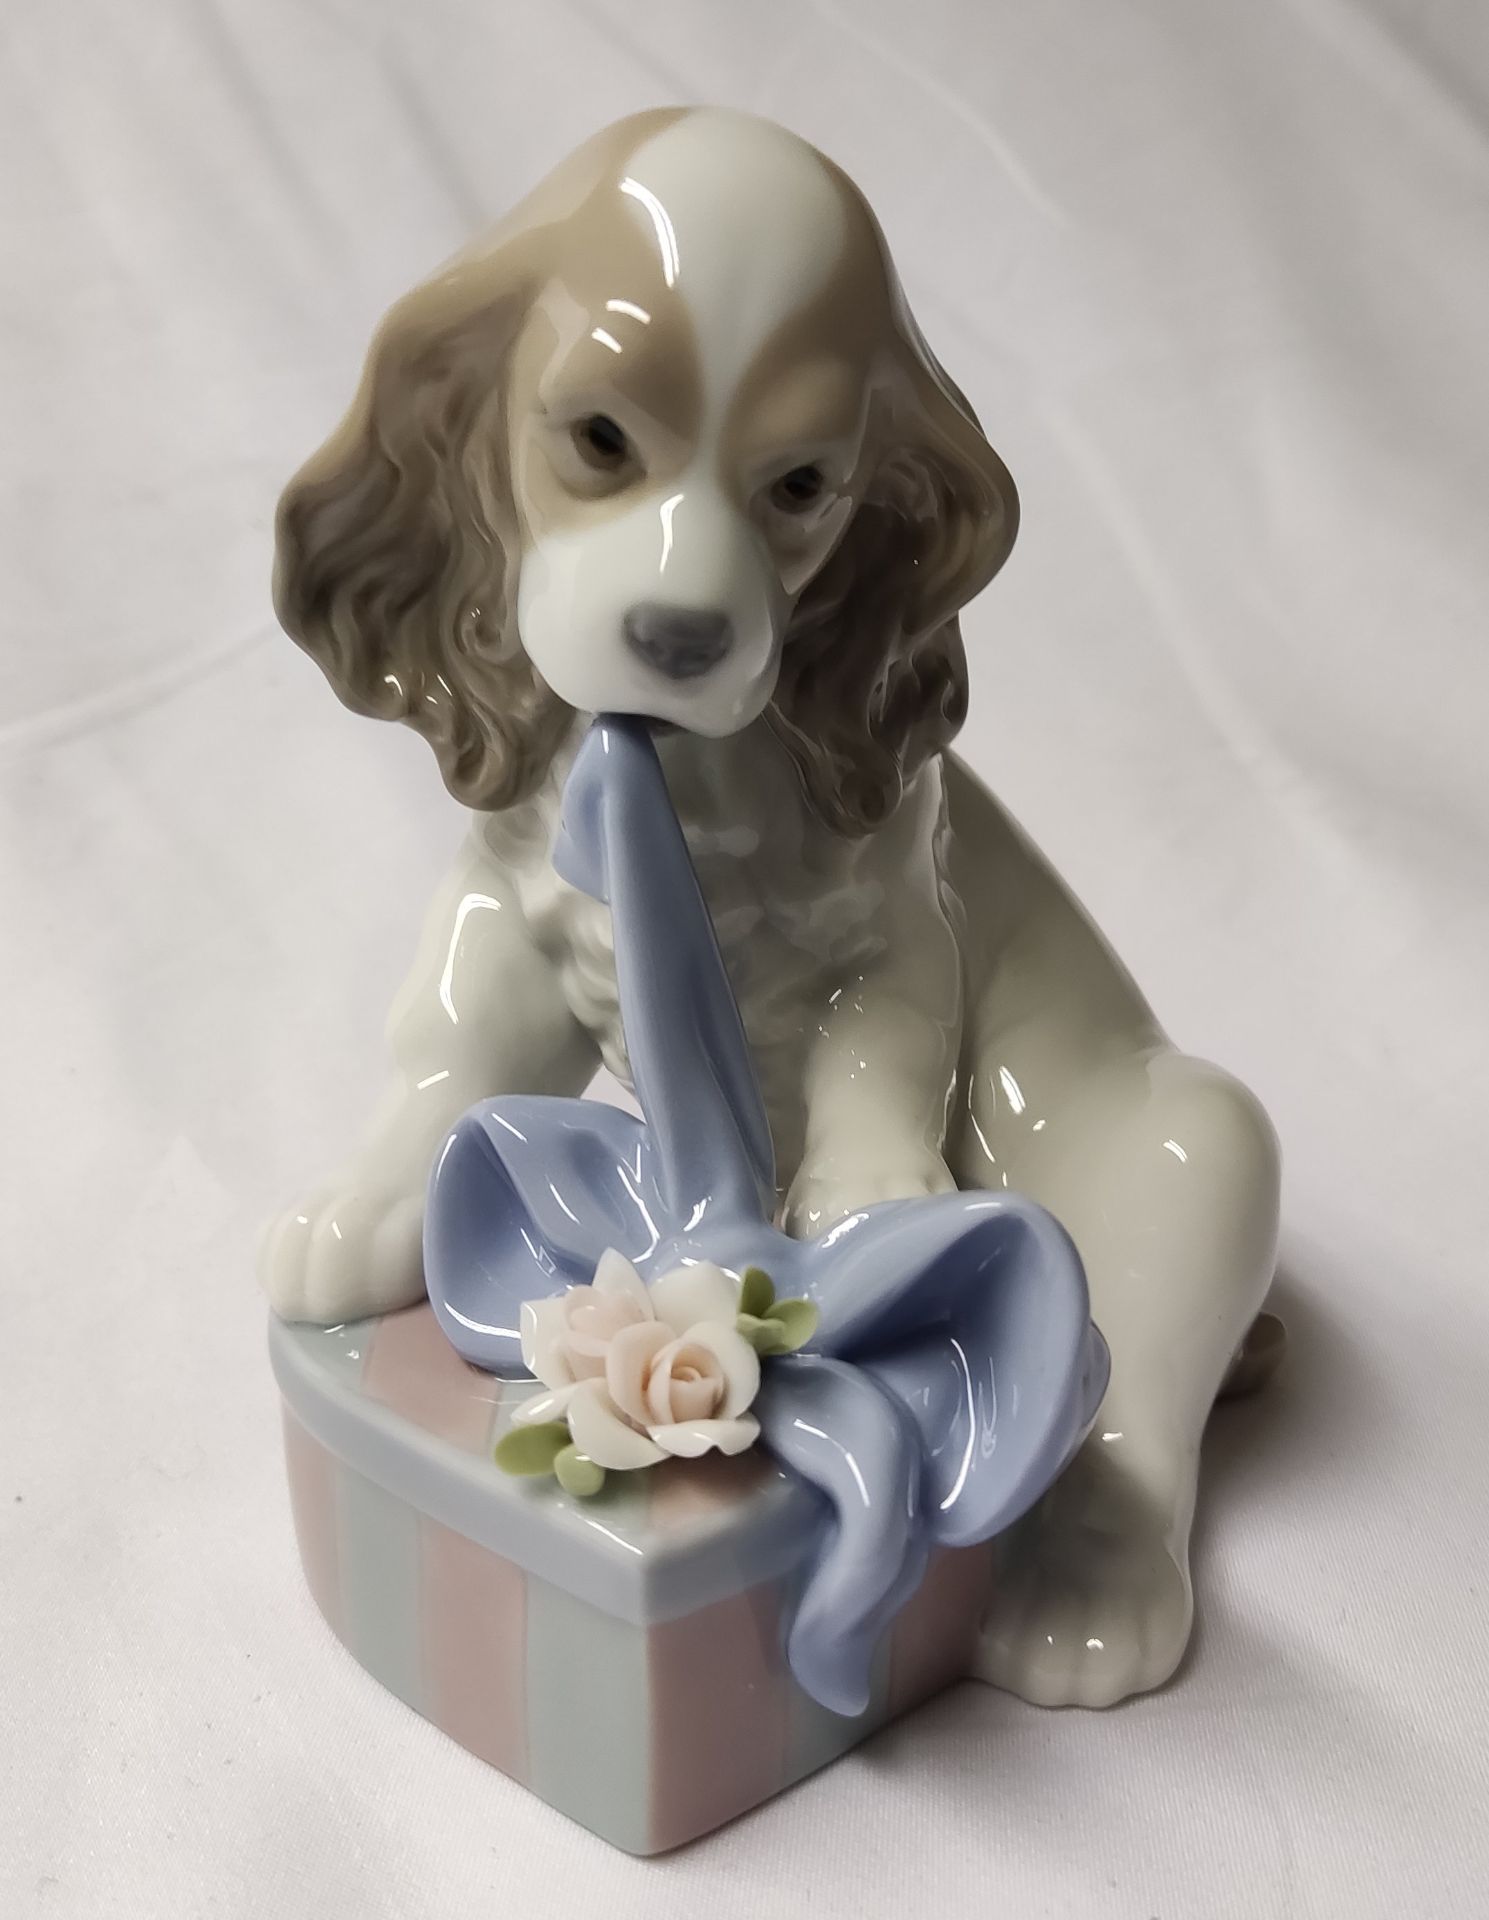 1 x LLADRO Can't Wait Puppy Dog Porcelain Figurine - New/Boxed - RRP £330 - Ref: /HOC244/HC5 - CL987 - Image 6 of 22